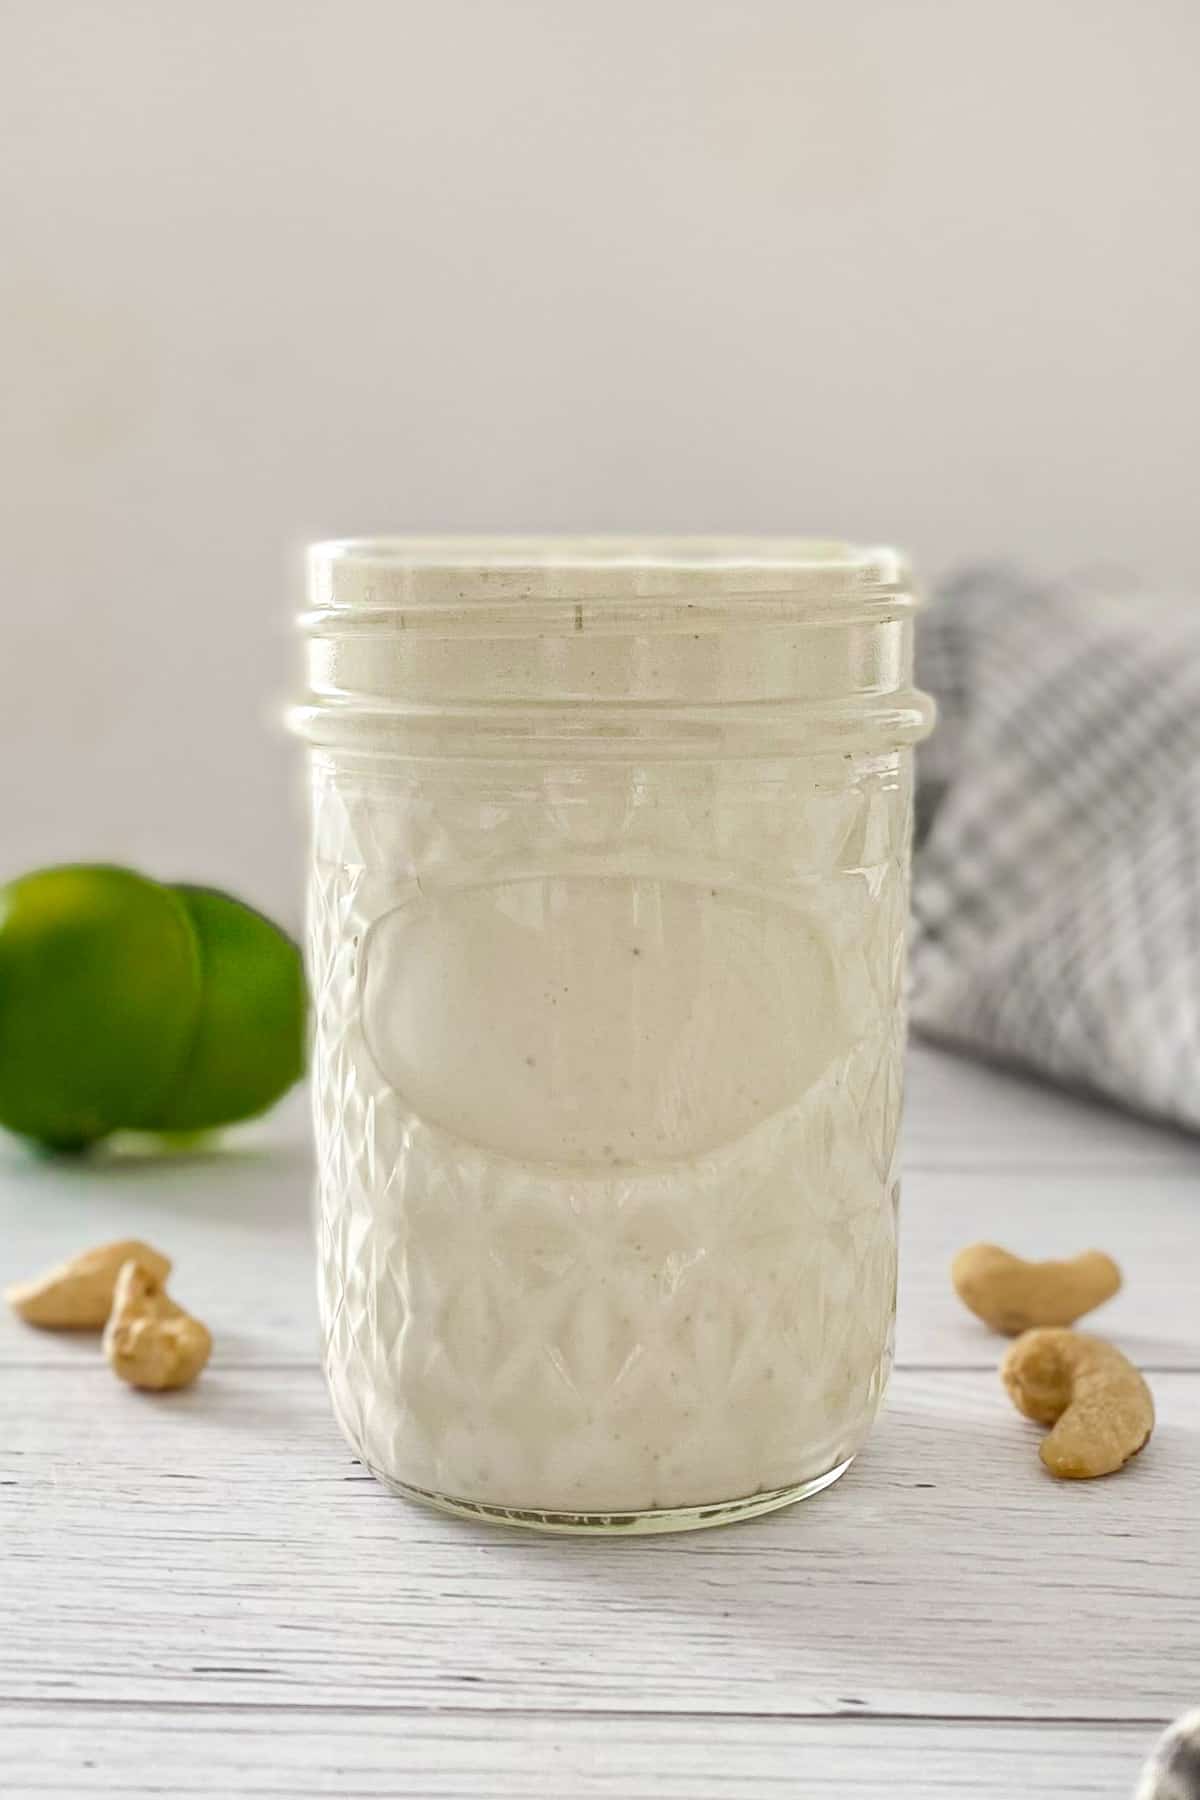 Glass jar filled with white sauce and limes in the background.